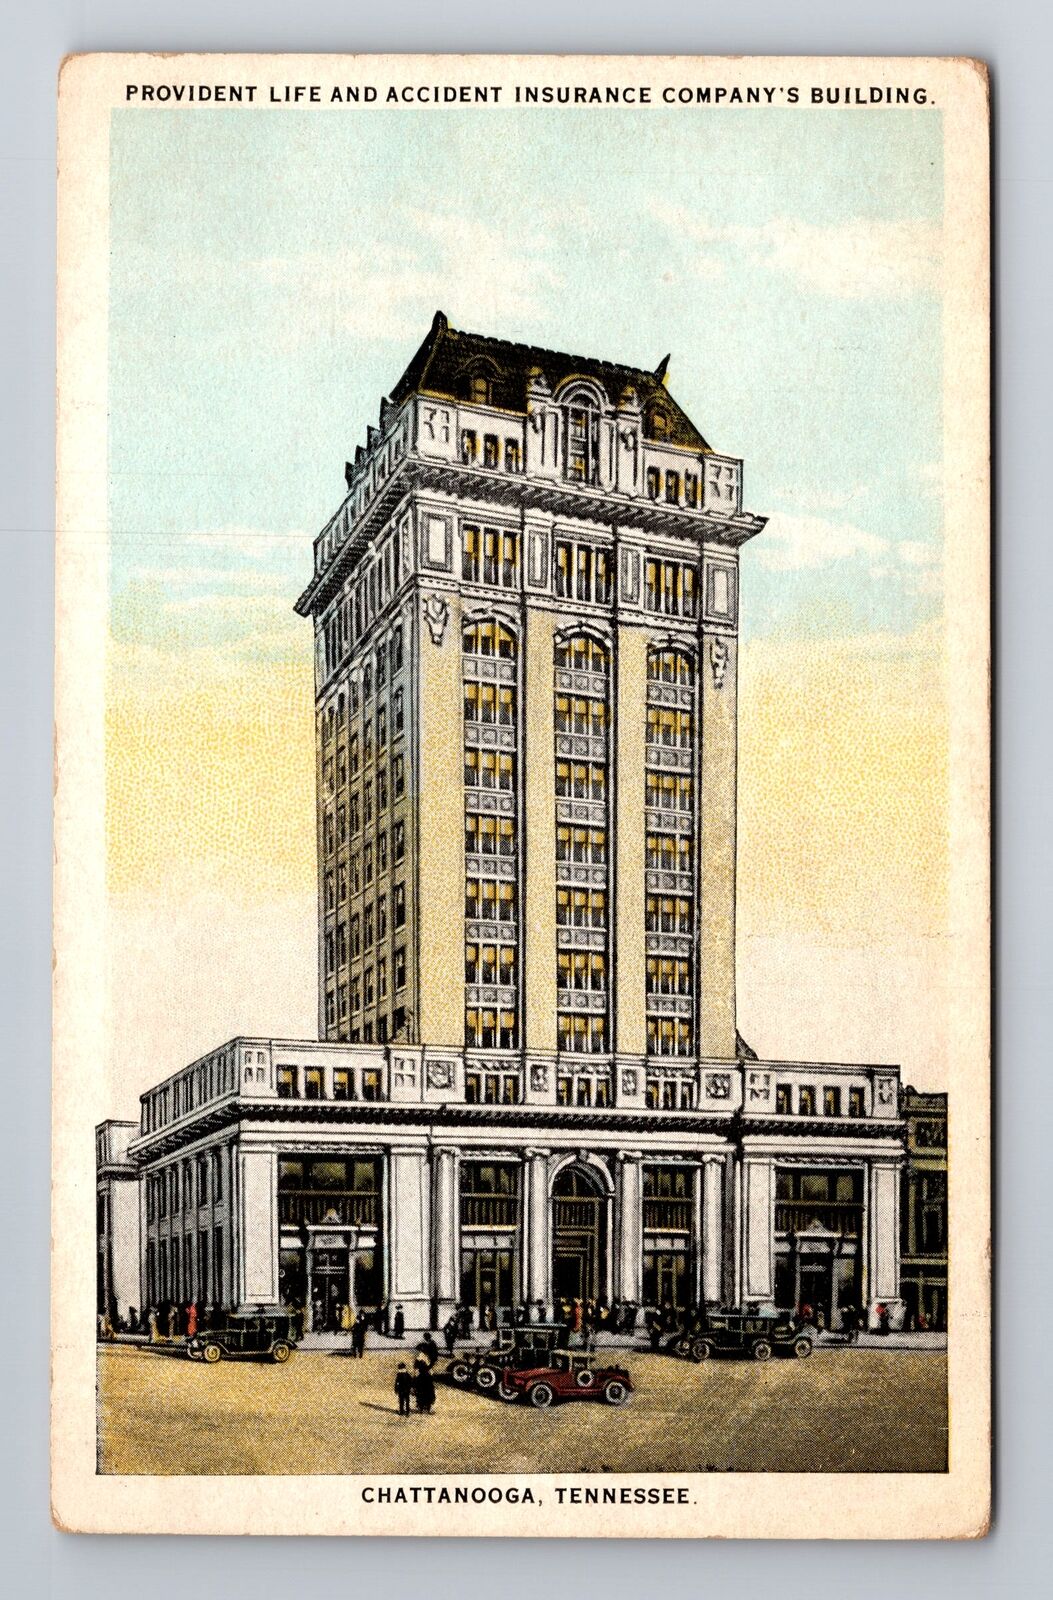 Chattanooga TN-Tennessee, Provident Life Insurance Building, Vintage Postcard